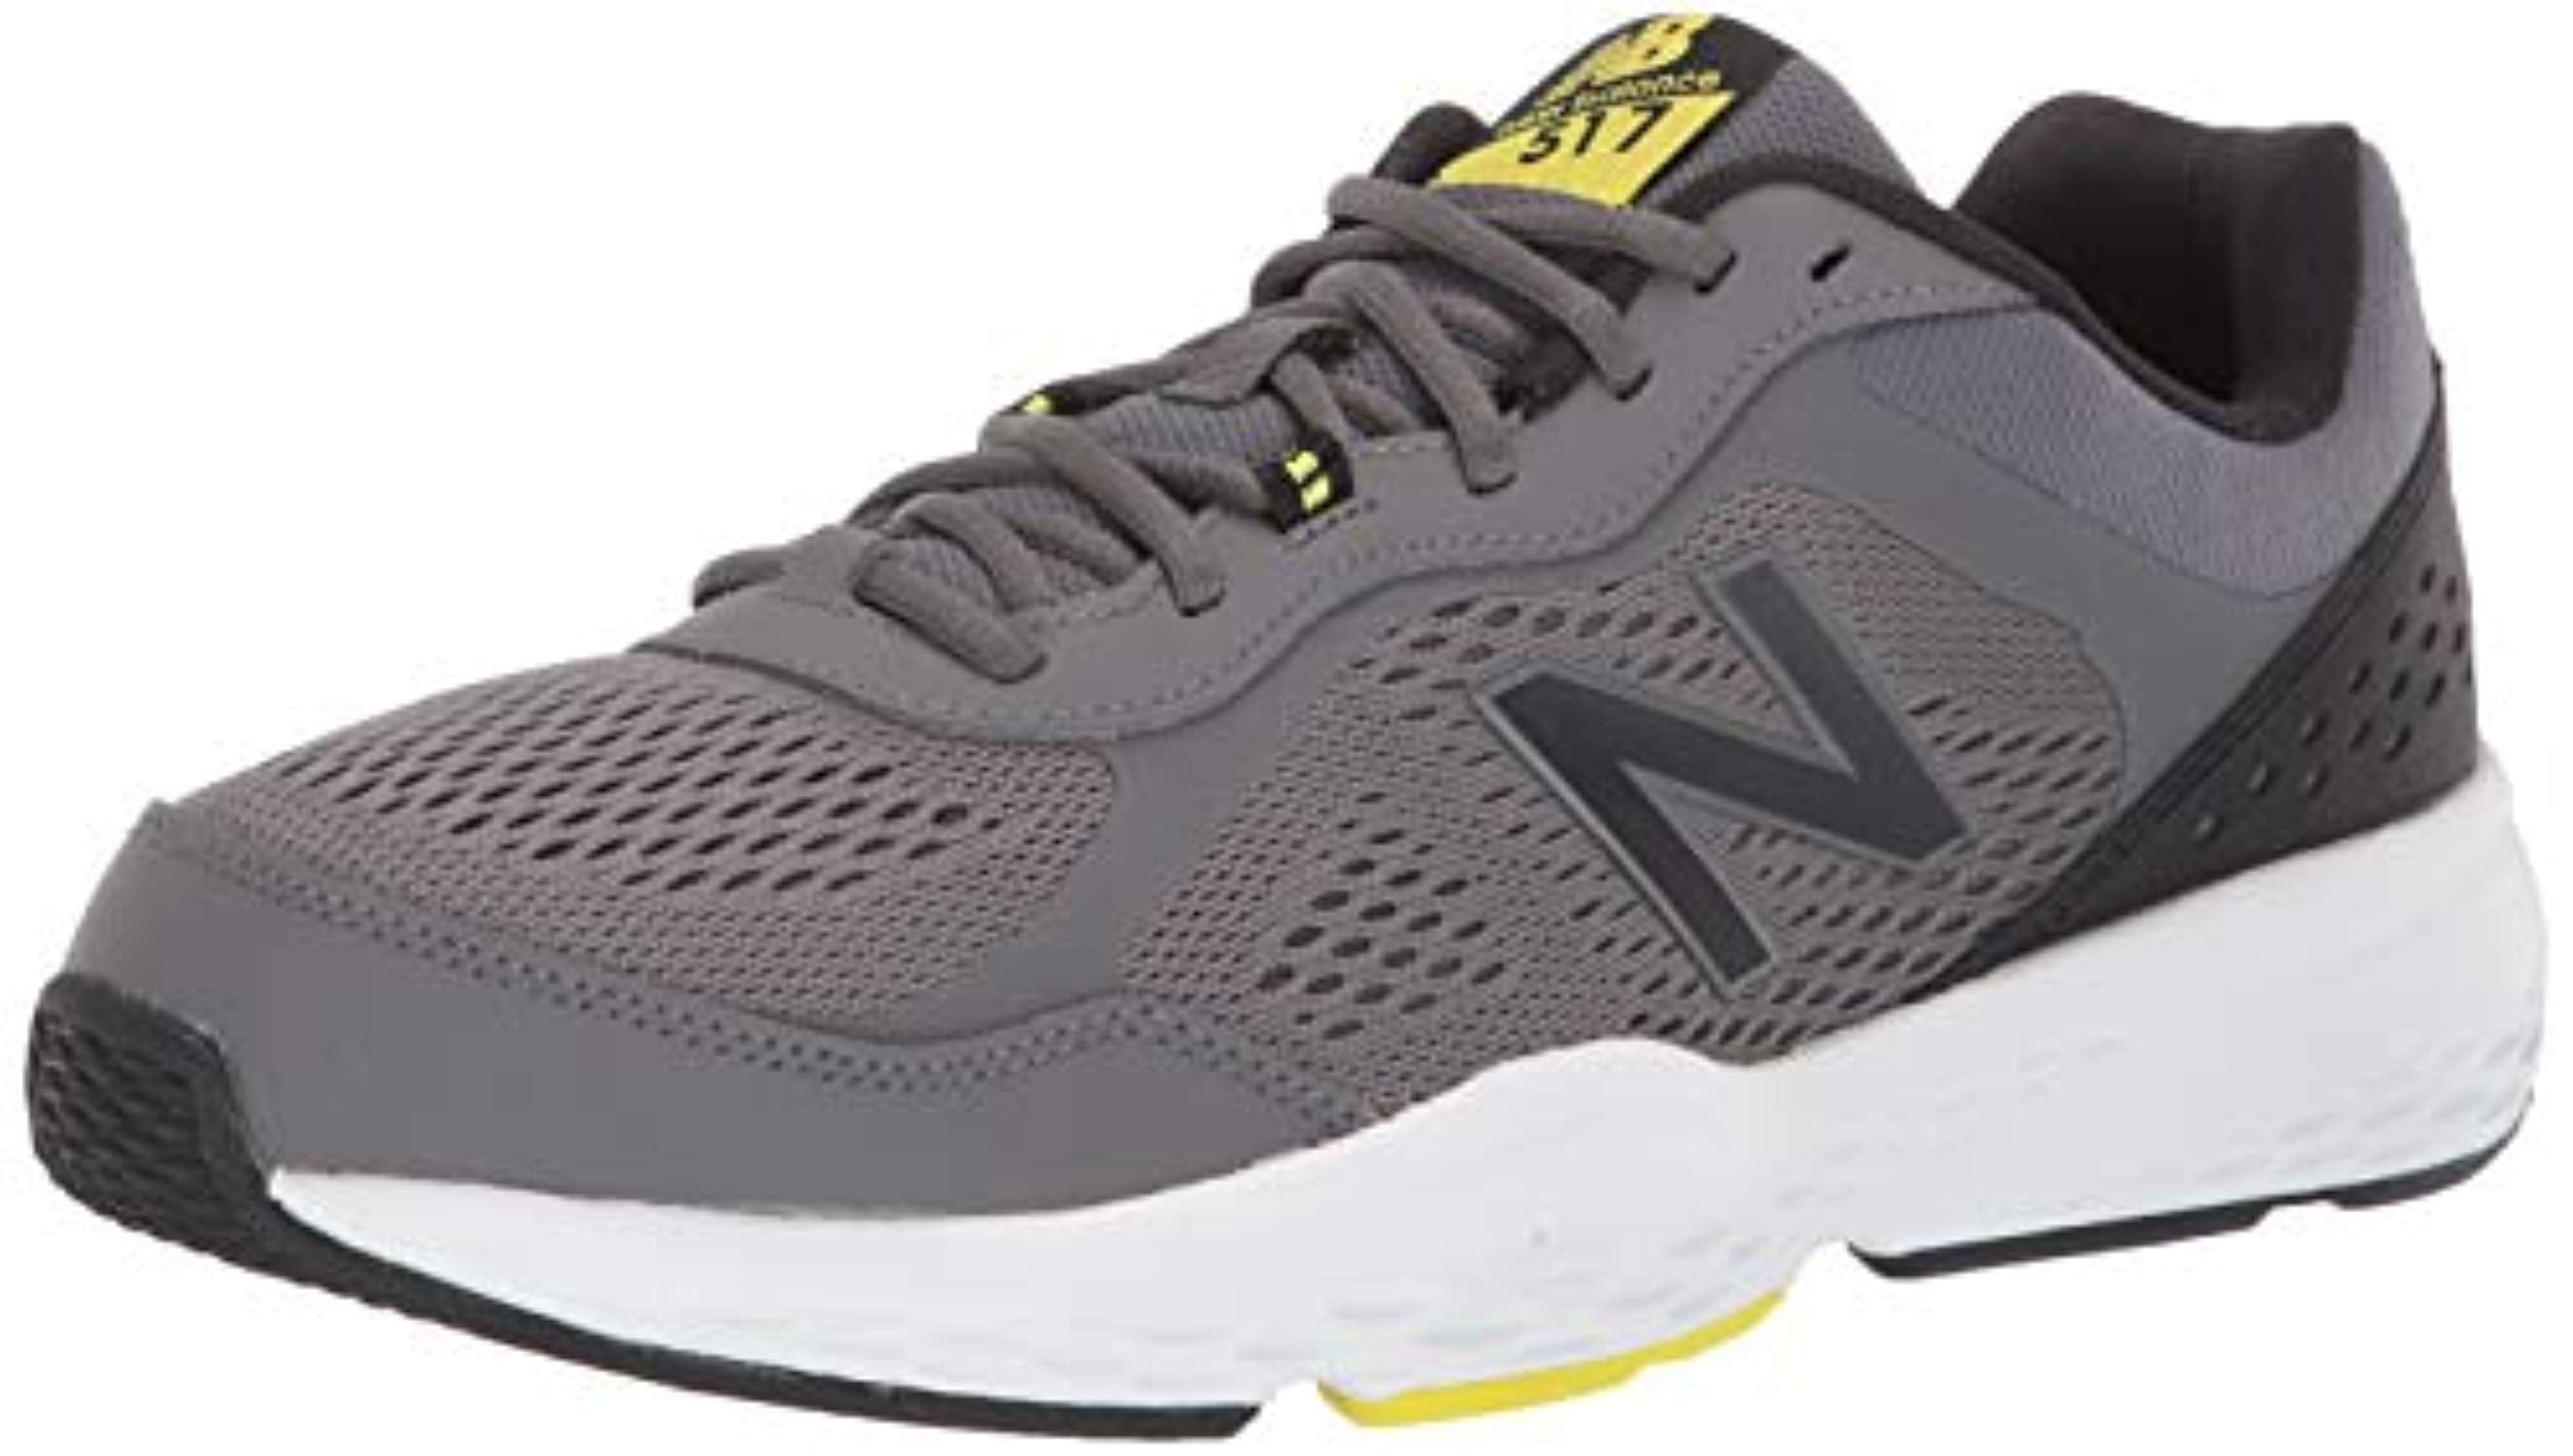 new balance 1012 cross trainer review